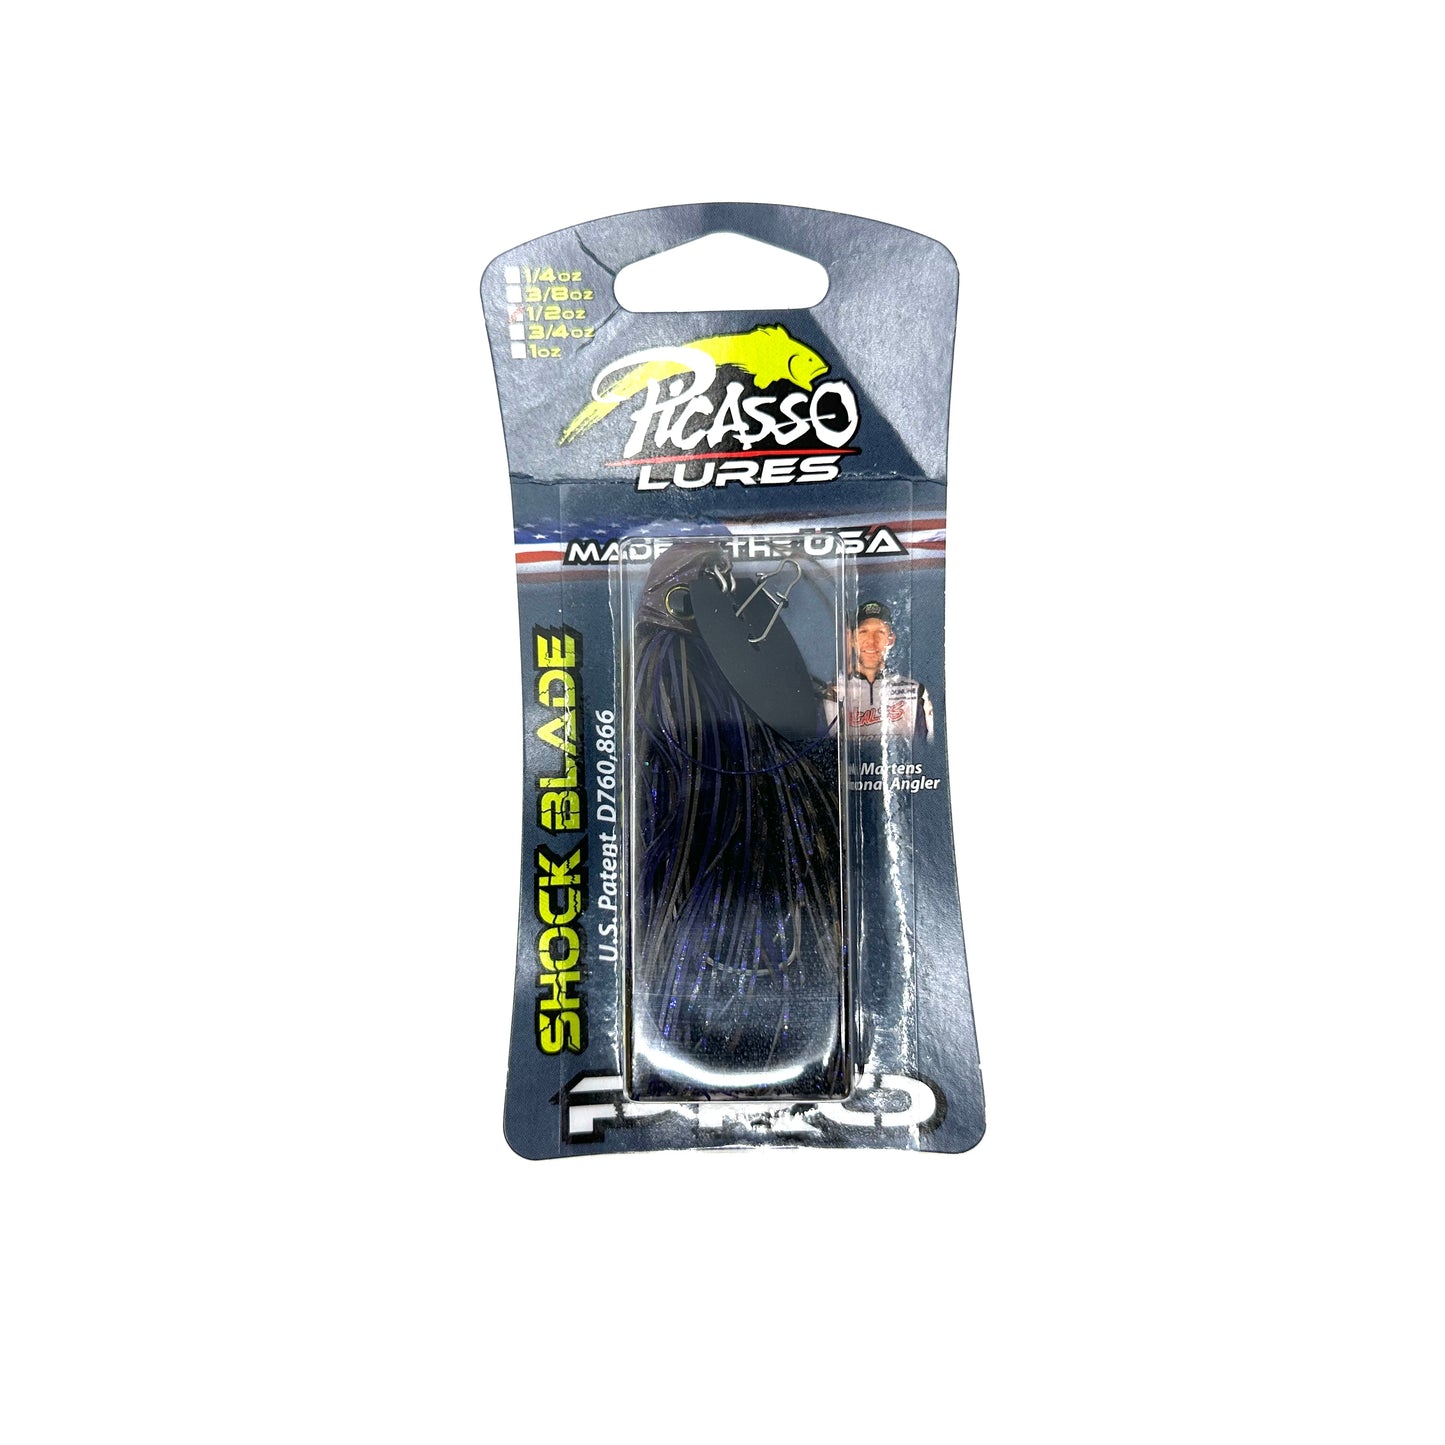 Picasso Lures-Shock Blade Pro